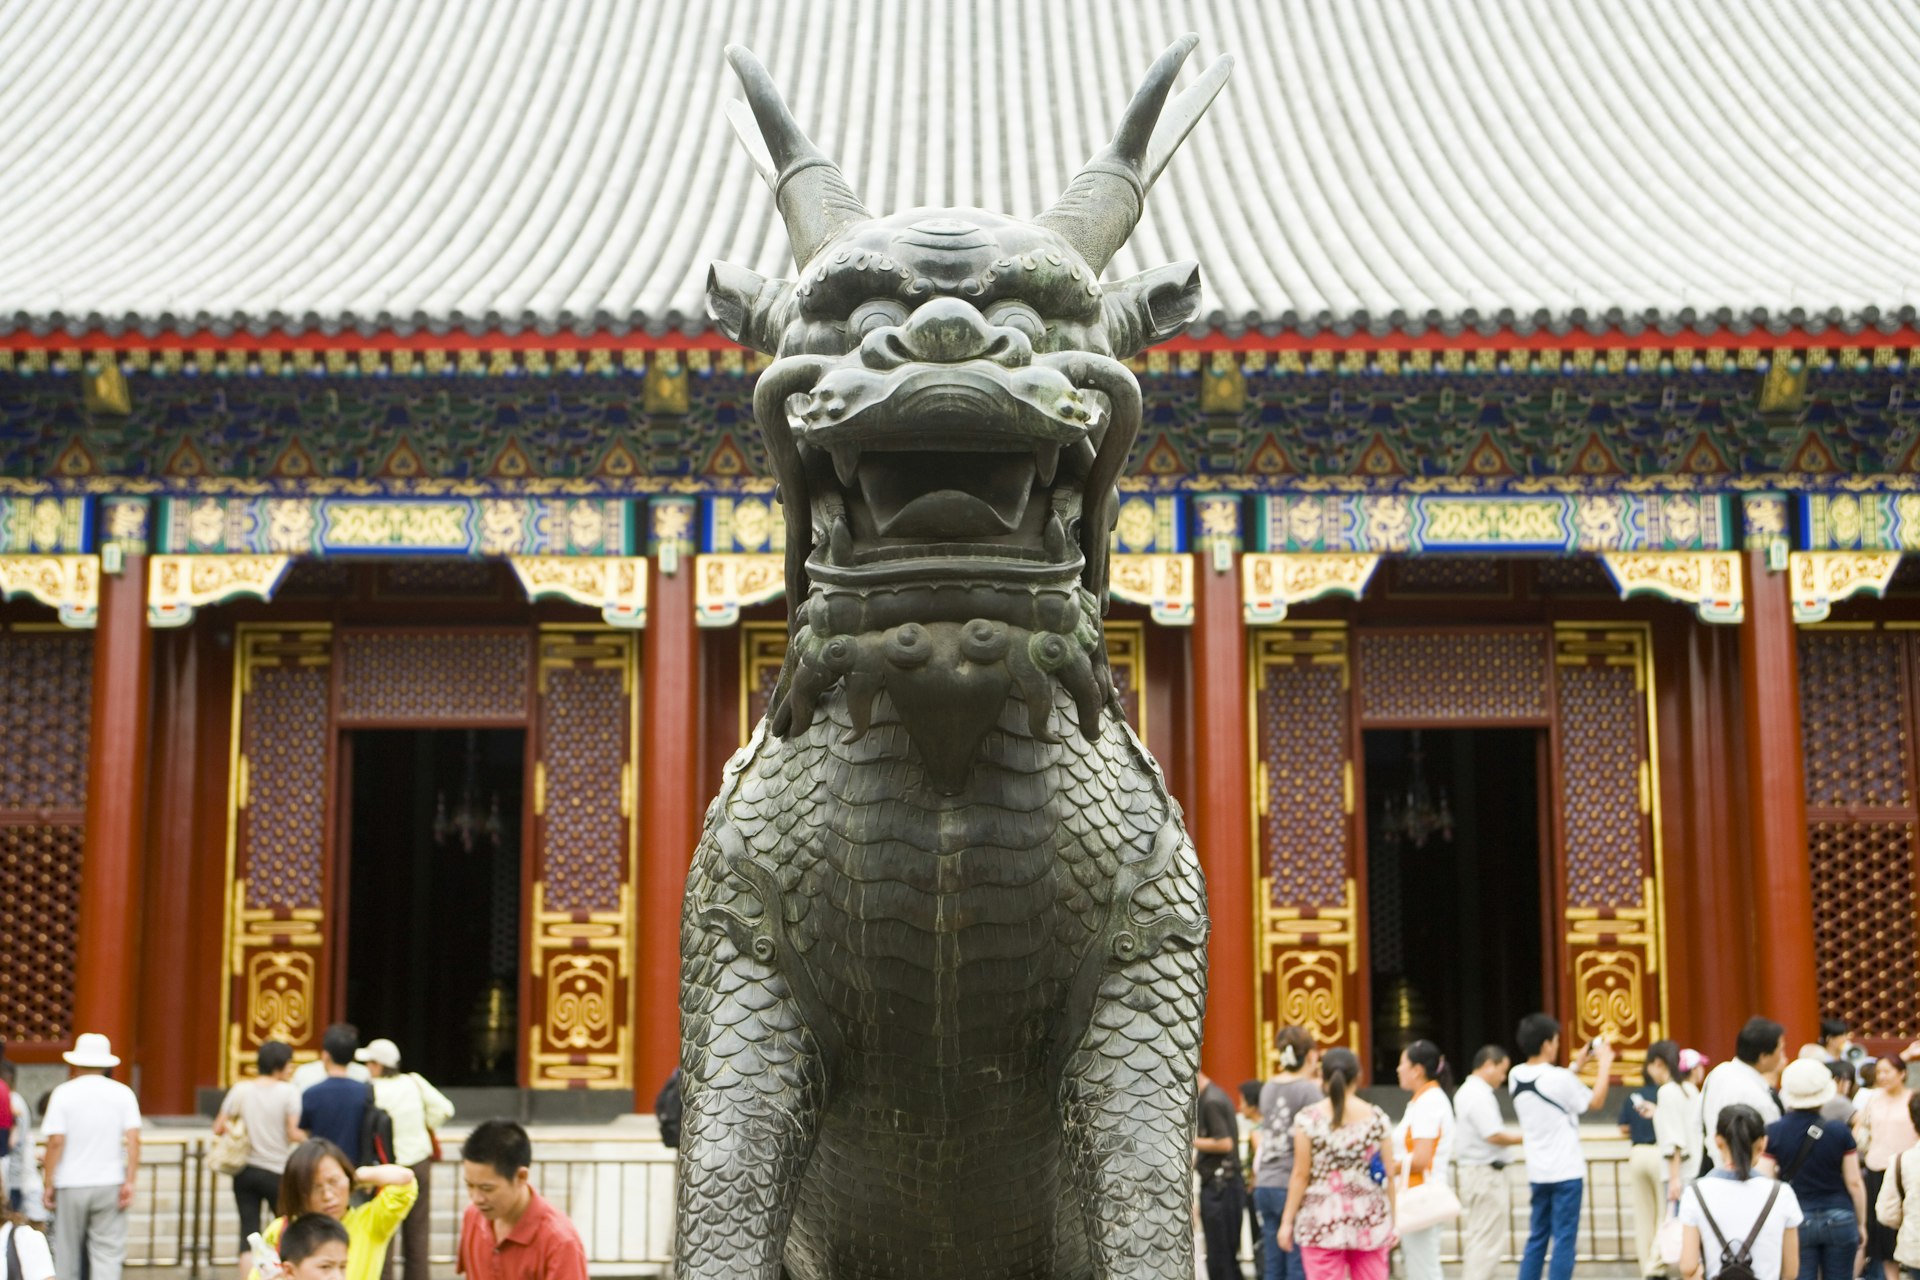 A sculpture of a fierce, horned dragon mid-road in front of crowds visiting the Summer Palace